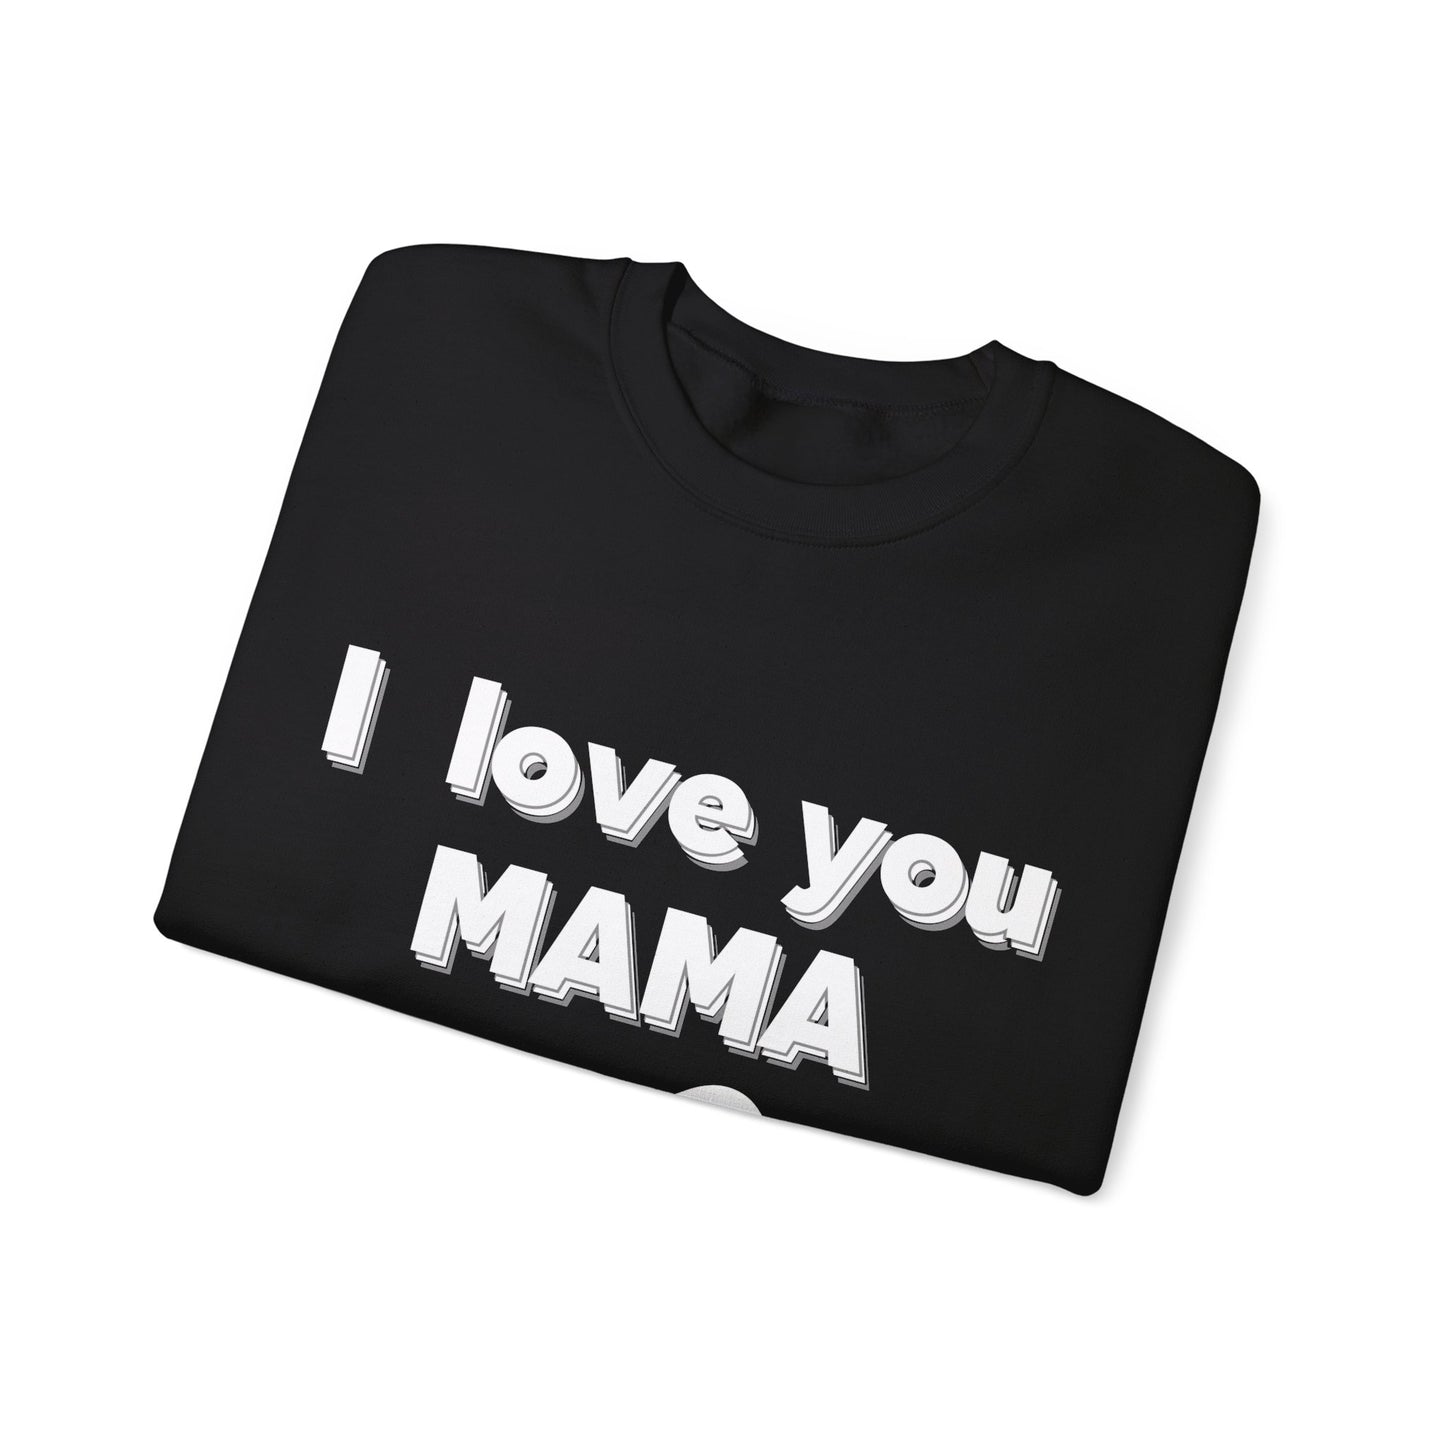 Personalized premium sweatshirt for mom, comfort and style, mother's day, gifts for mom's day, custom mama, i love you mama